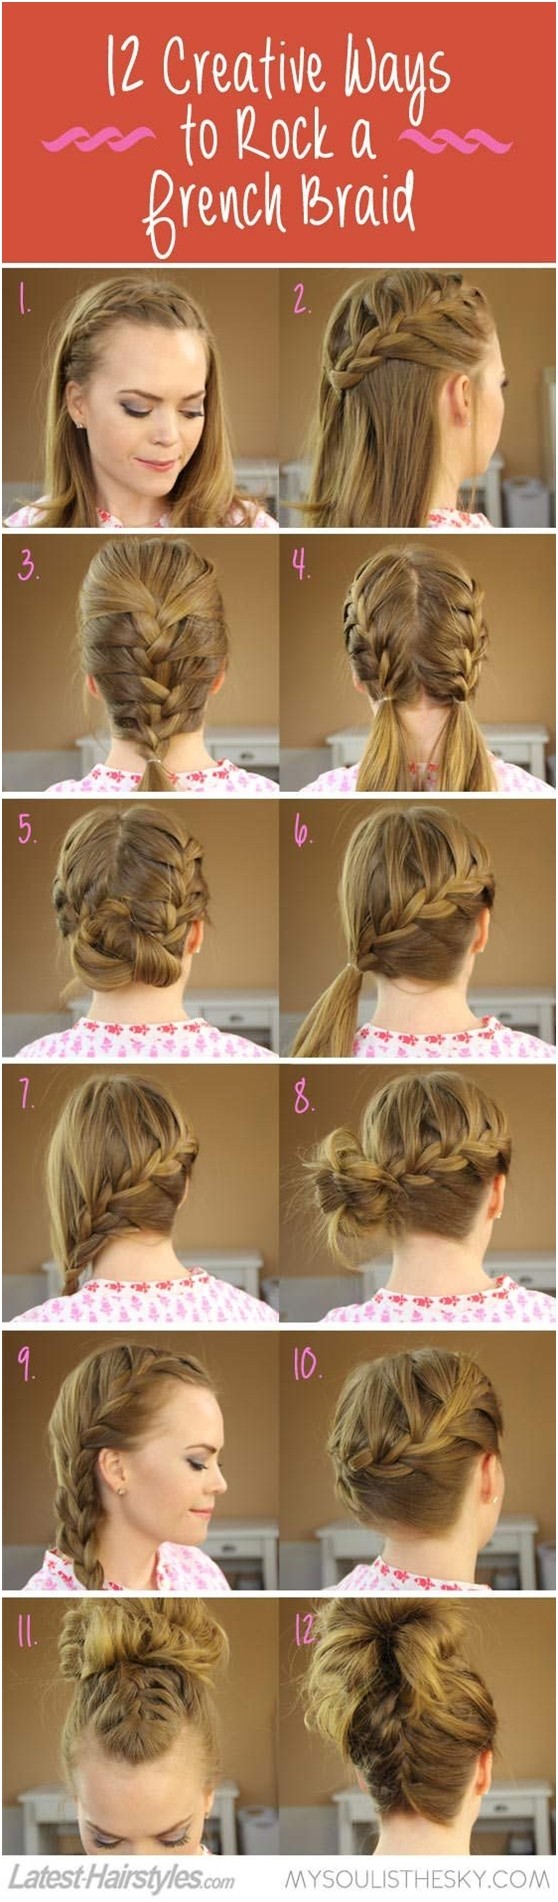 11 everyday hairstyles for french braid - popular haircuts